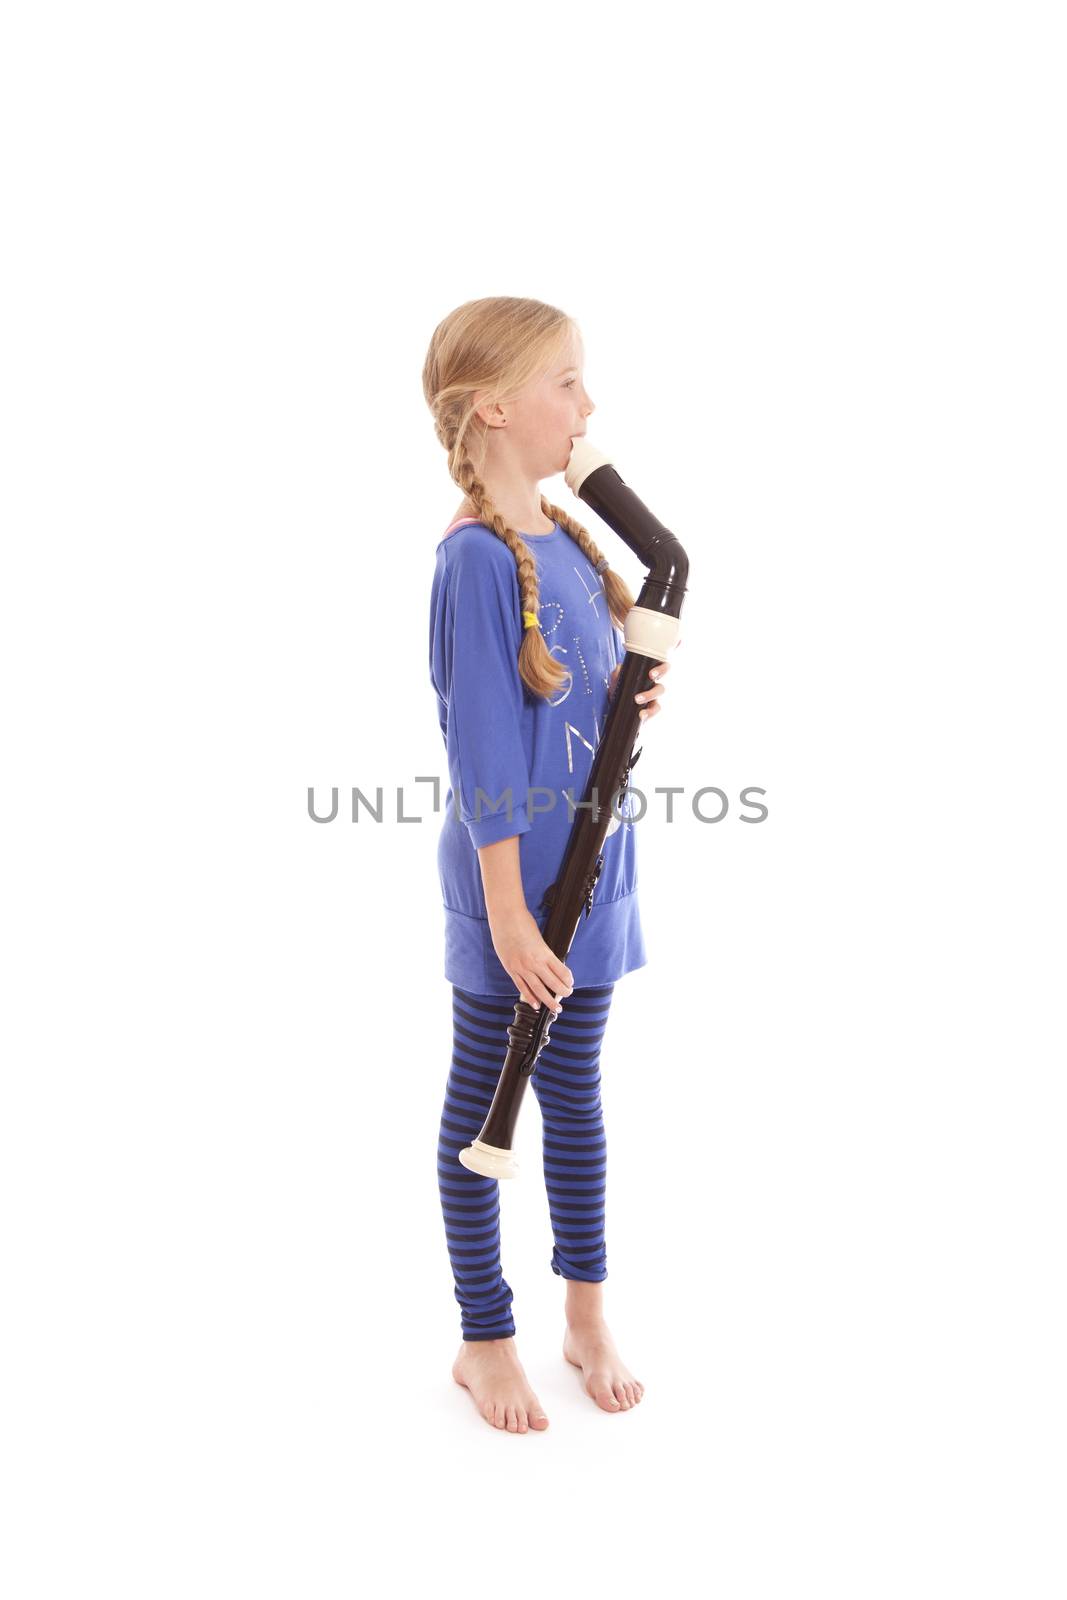 young girl in blue playing bass recorder by ahavelaar